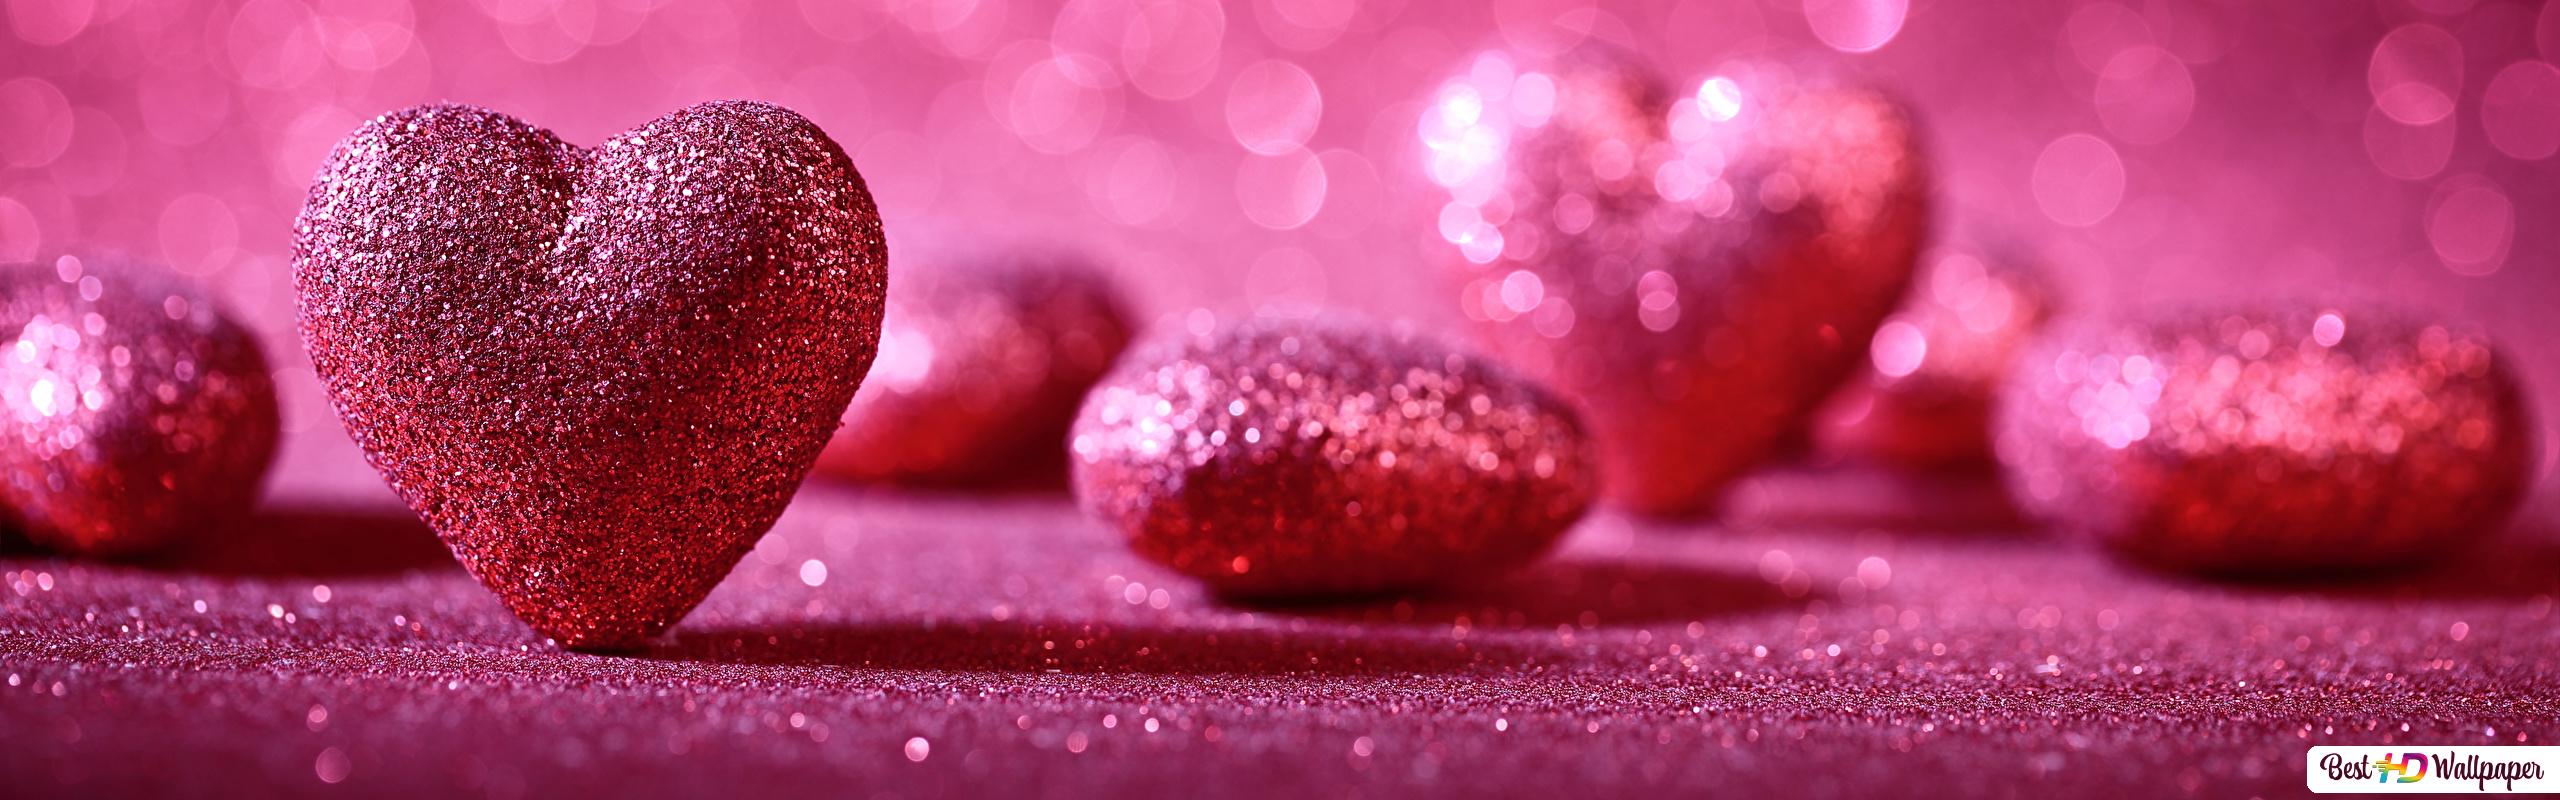 Valentine's day sparkling hearts HD wallpaper download's Day wallpaper